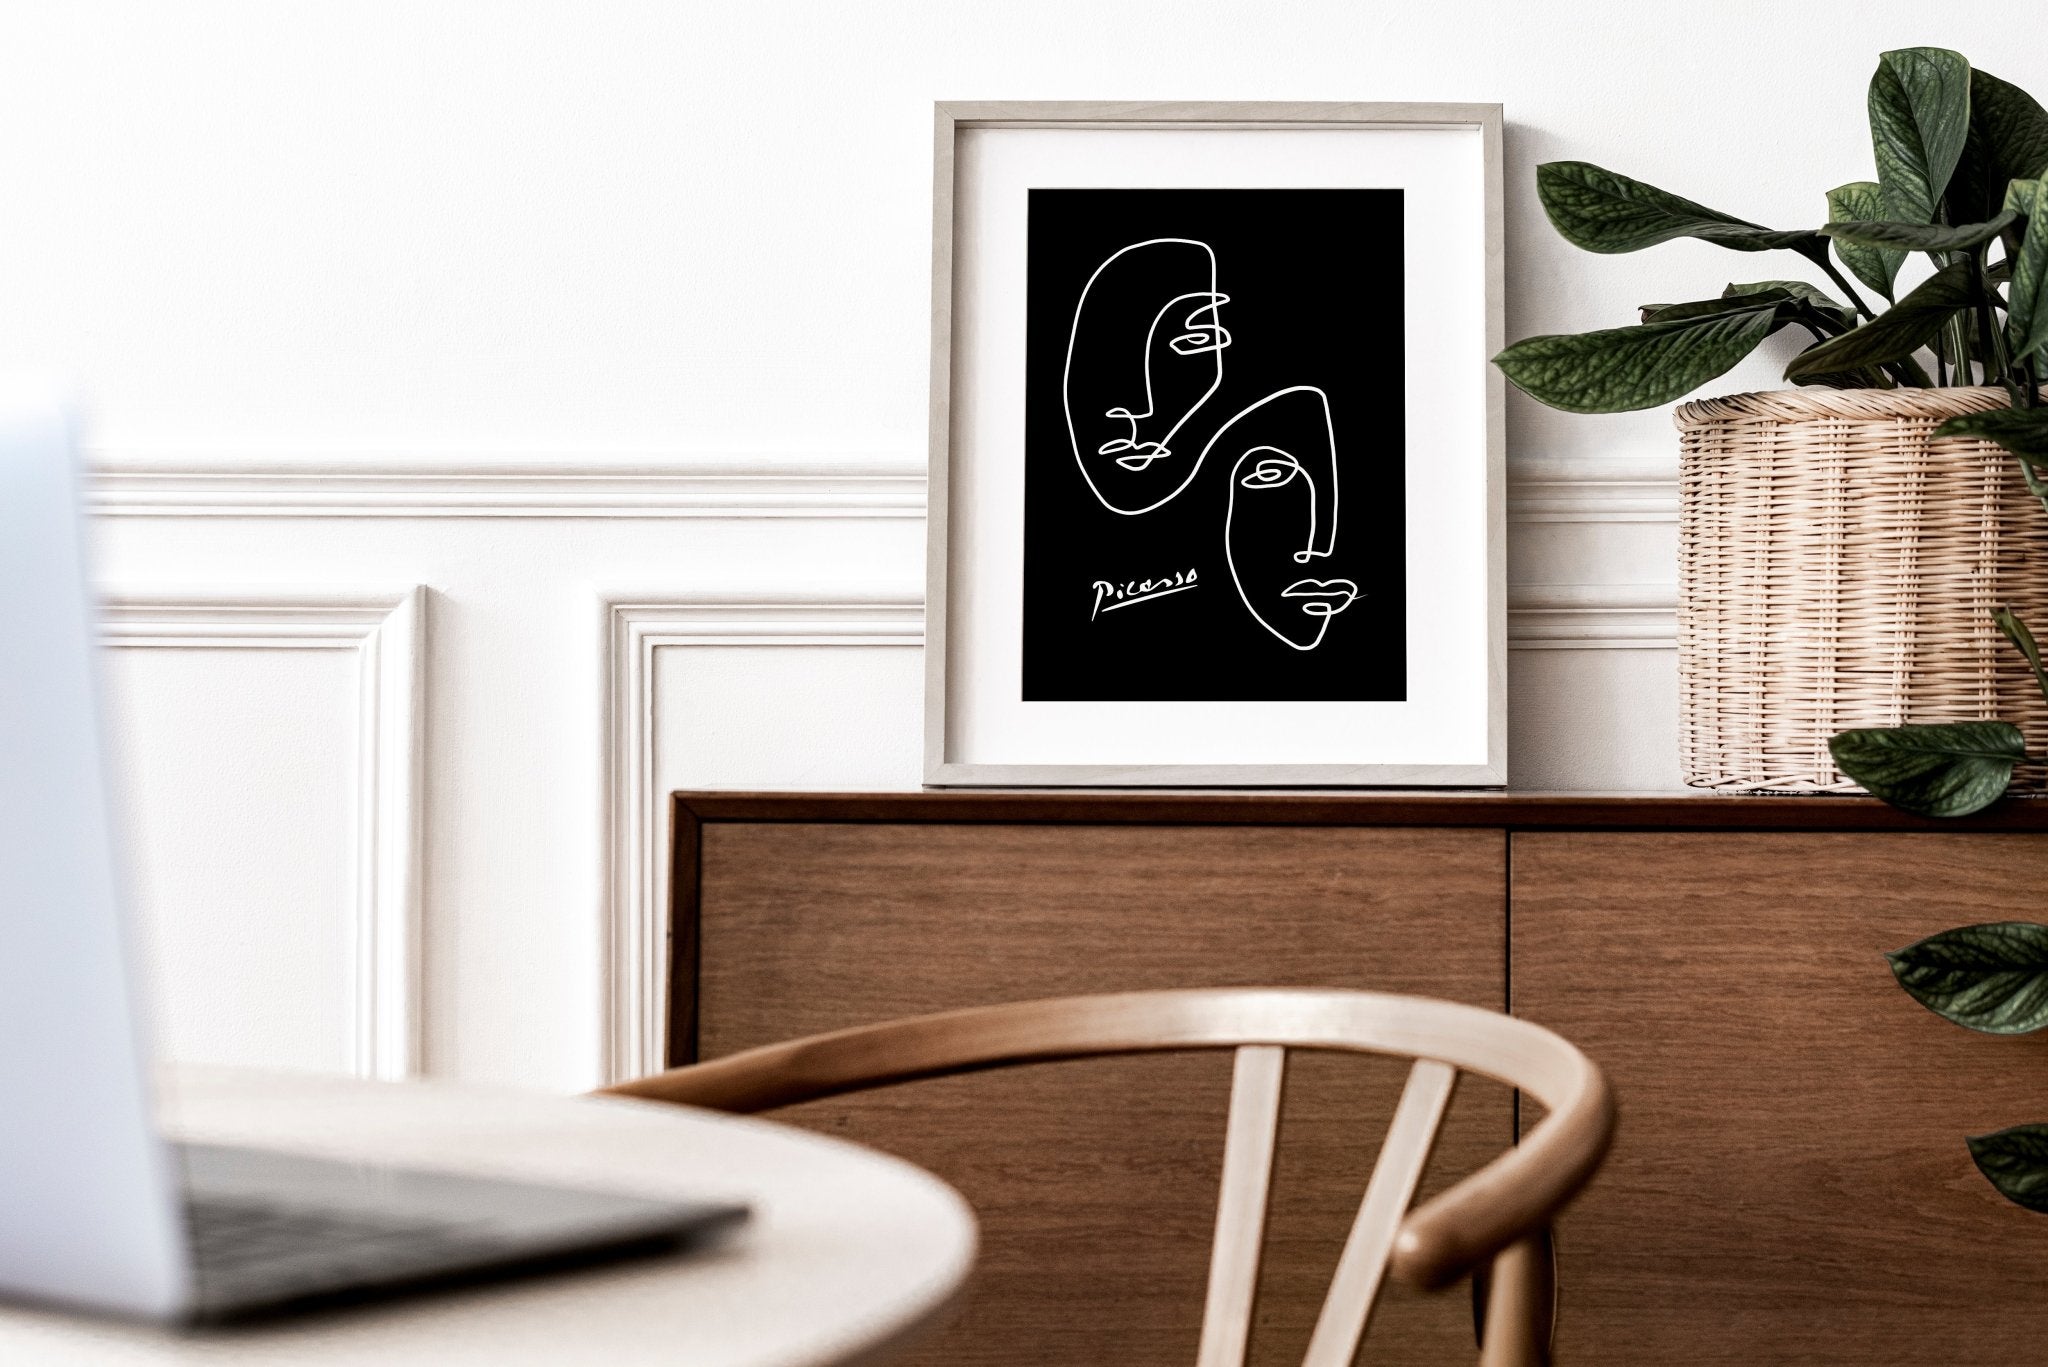 Picasso Inspired Black and White Abstract Art Print